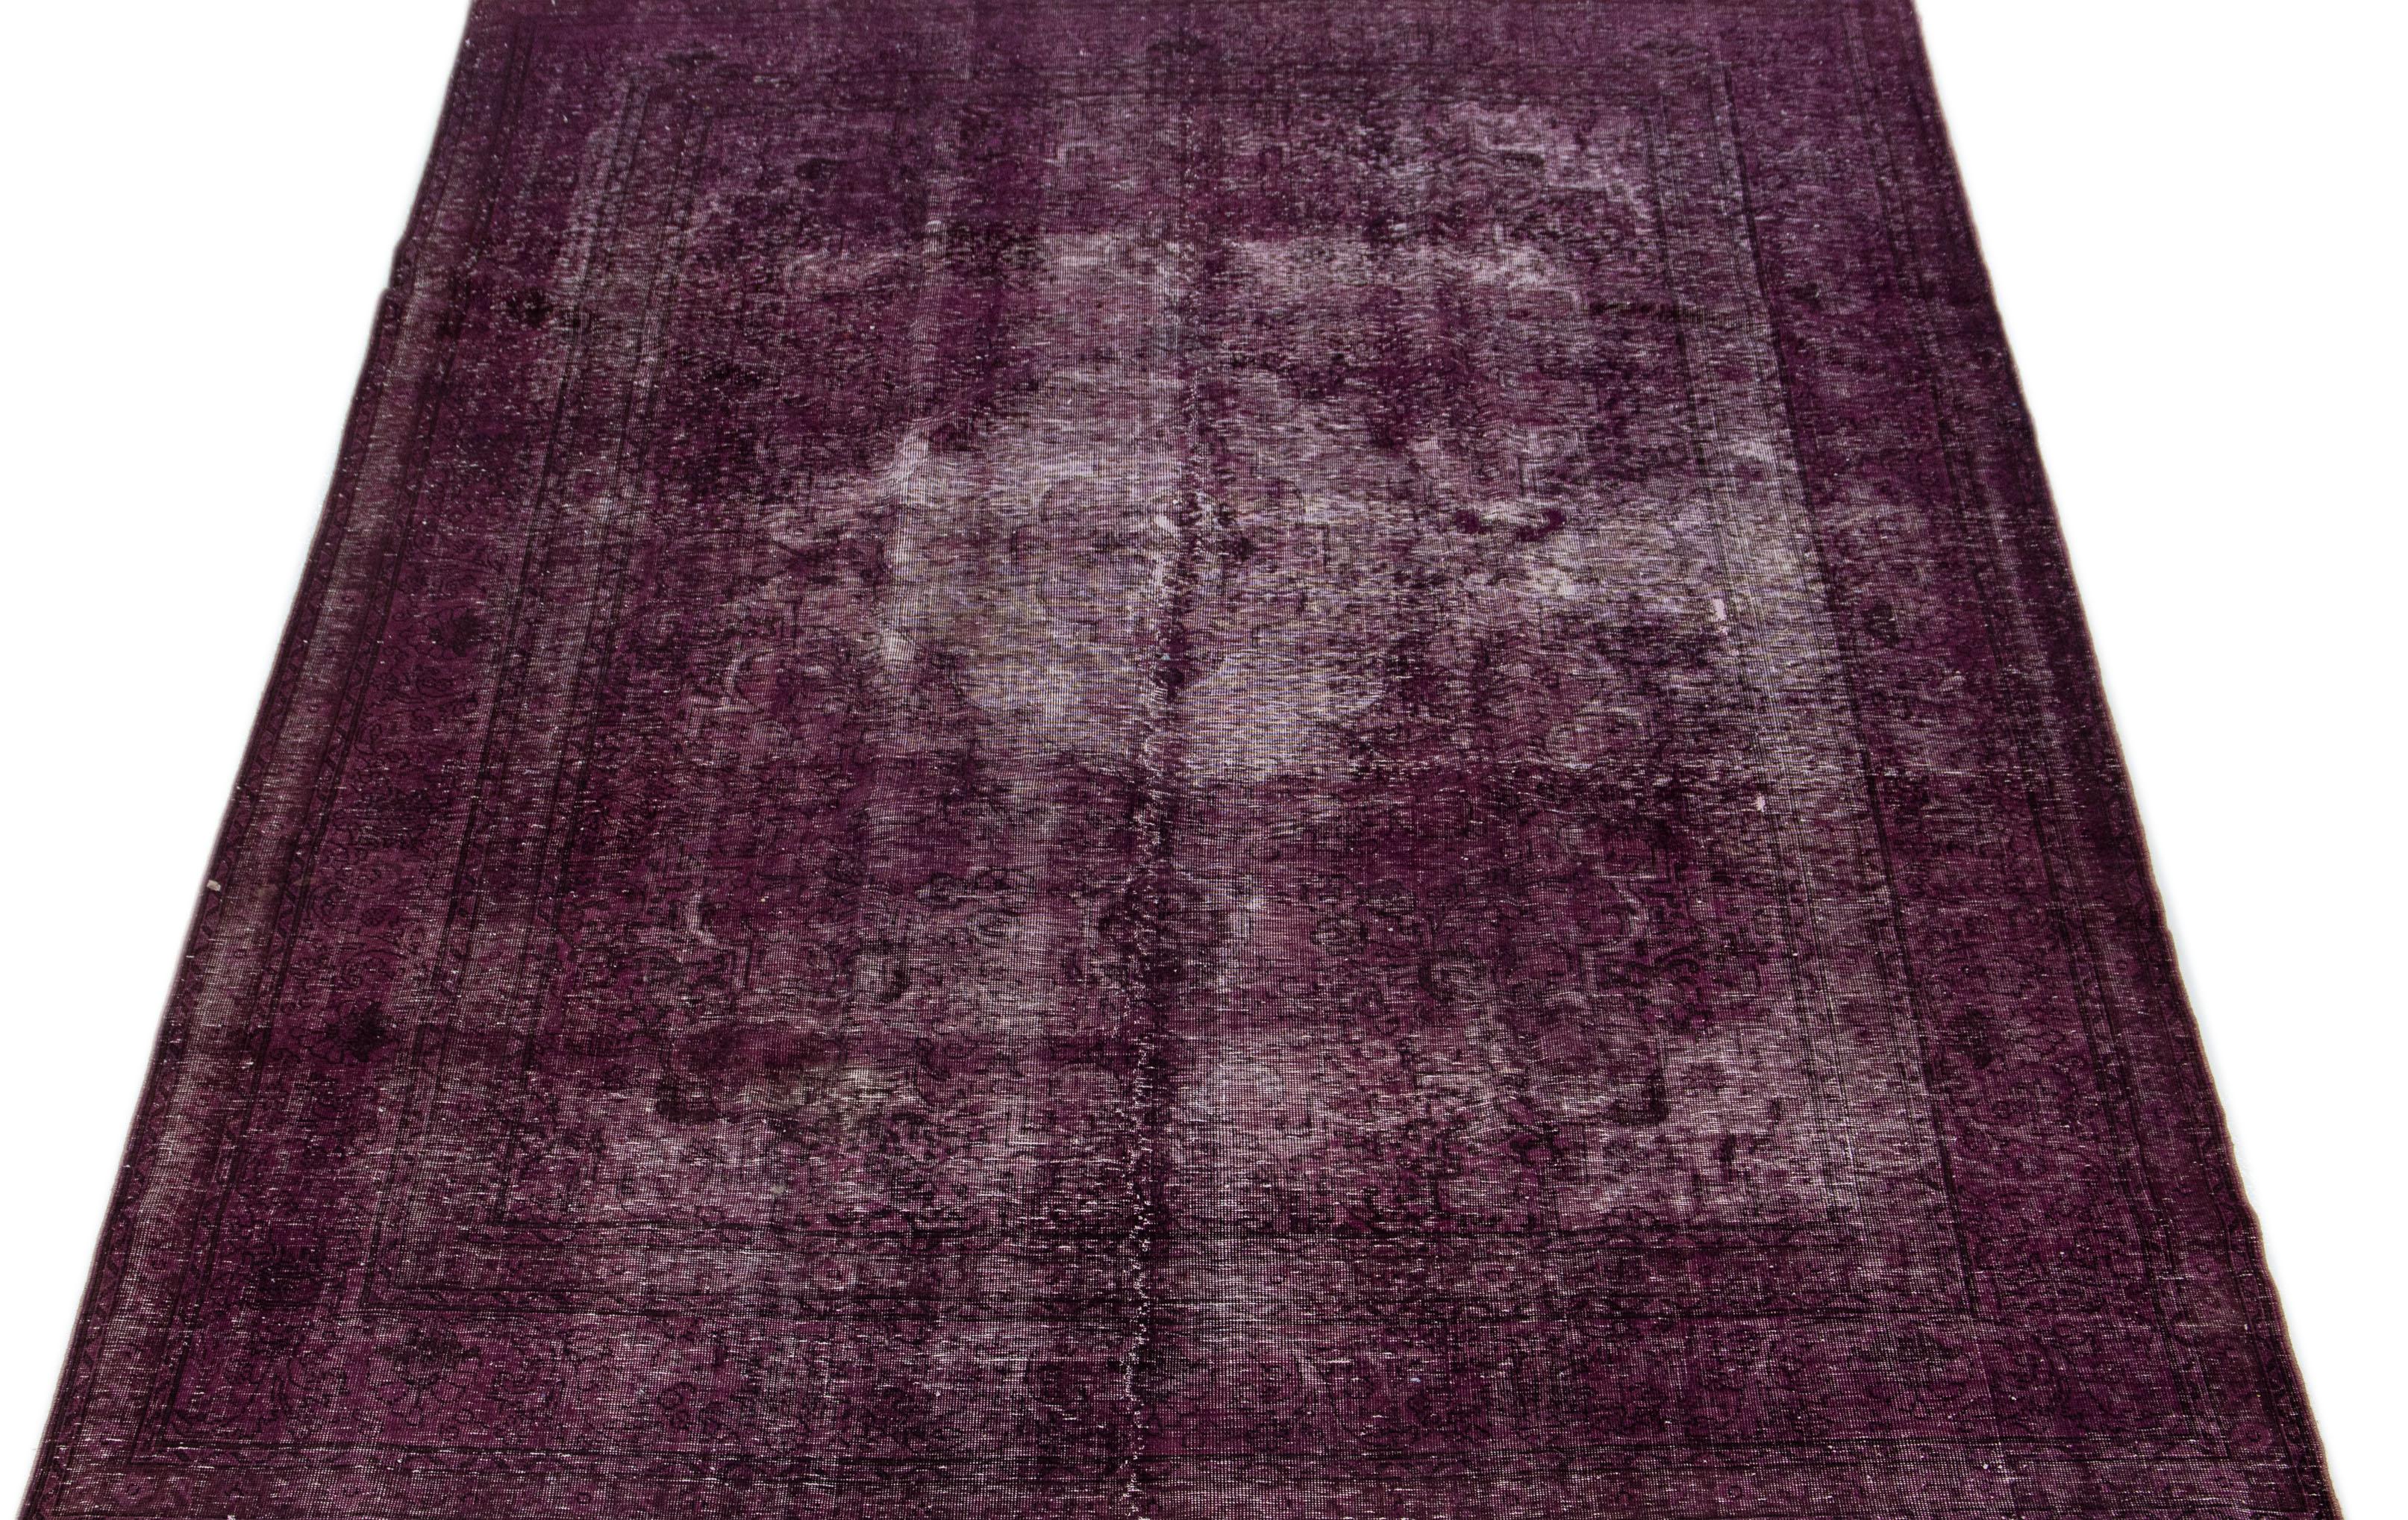 This vintage Persian rug from the 1950s showcases a striking medallion pattern in its center, which has been given an aged appearance through the process of distressing and overdrying. The rug's opulent purple color tone exudes a sense of grandeur